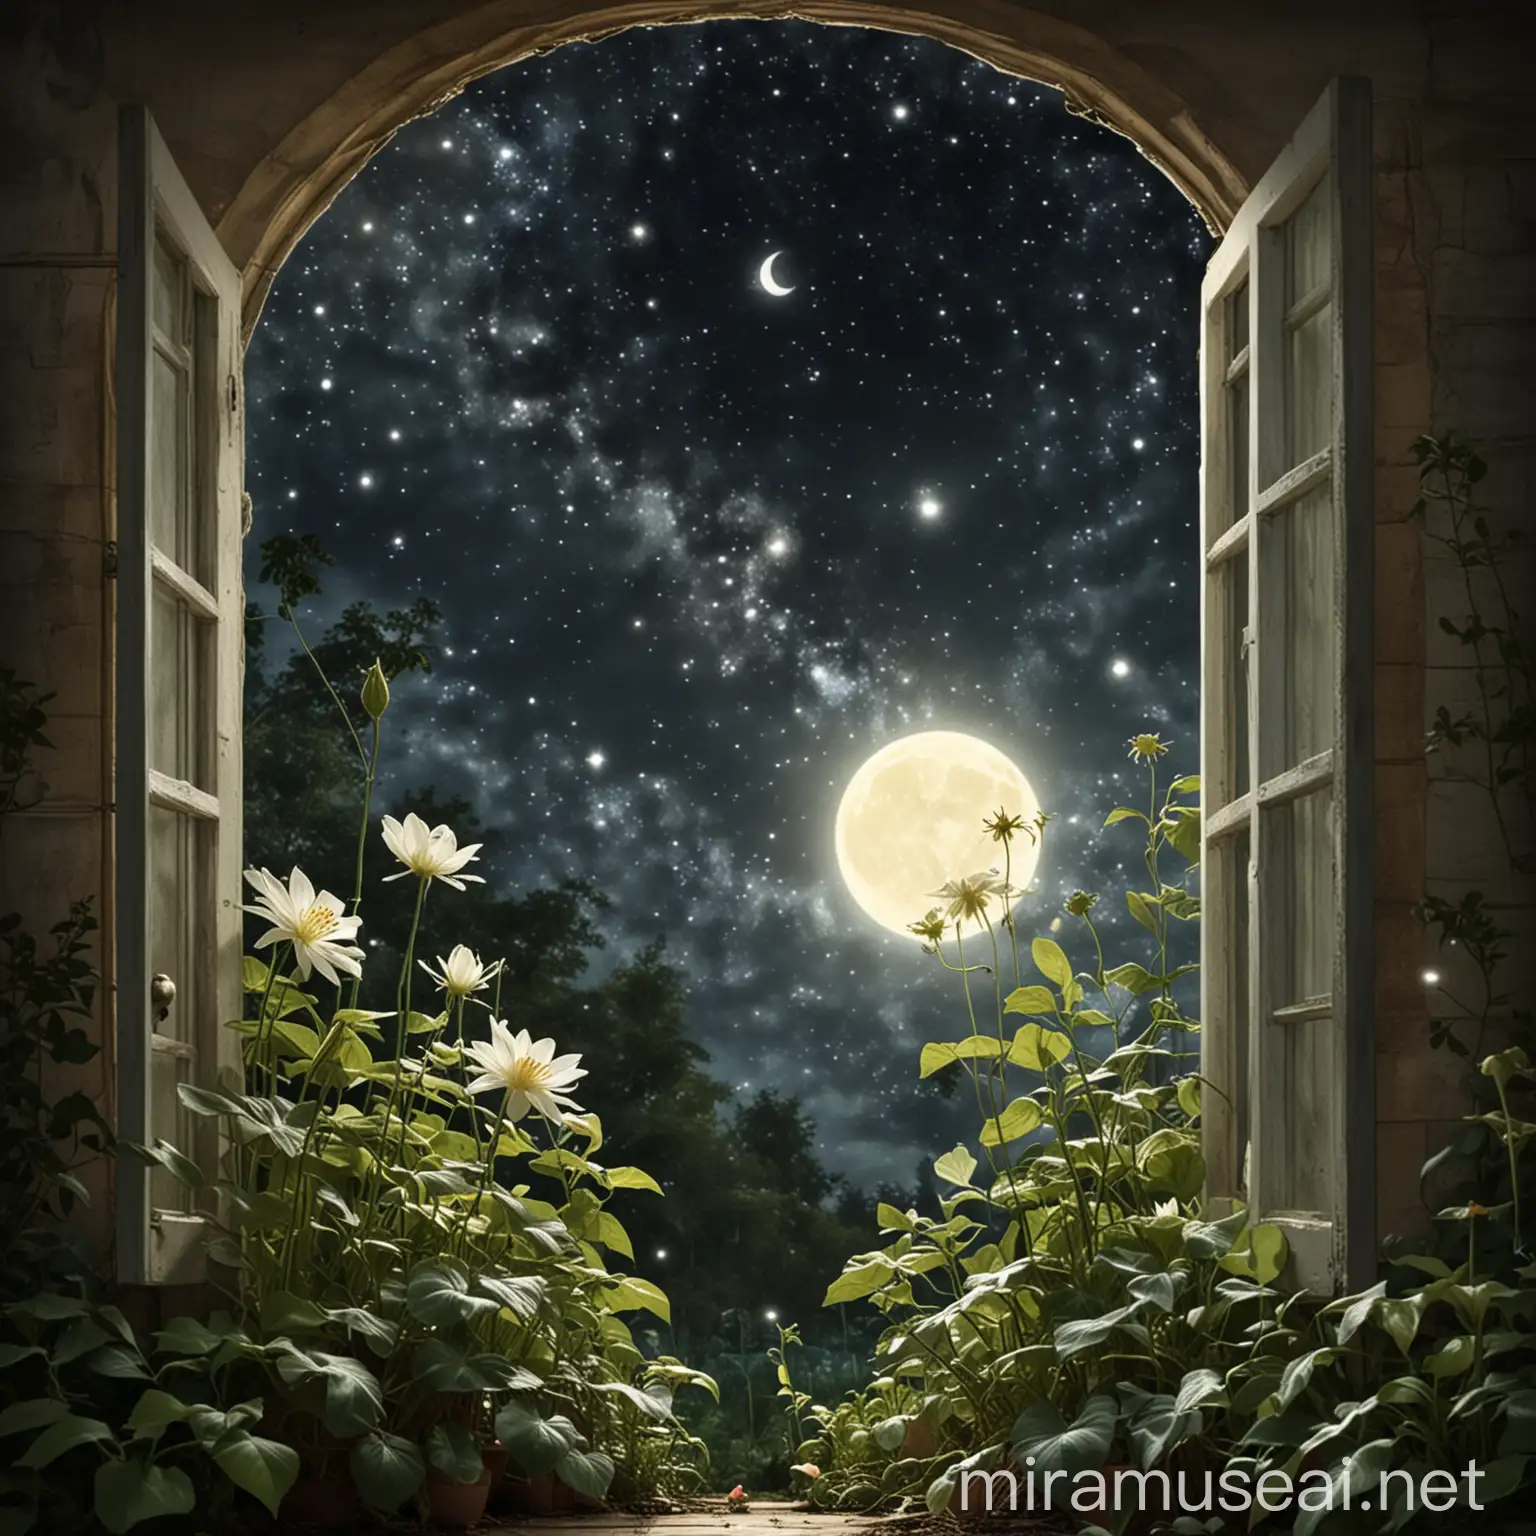 Magical Moonbeams Journey Moonflower Garden and Alexs Room Illustrations